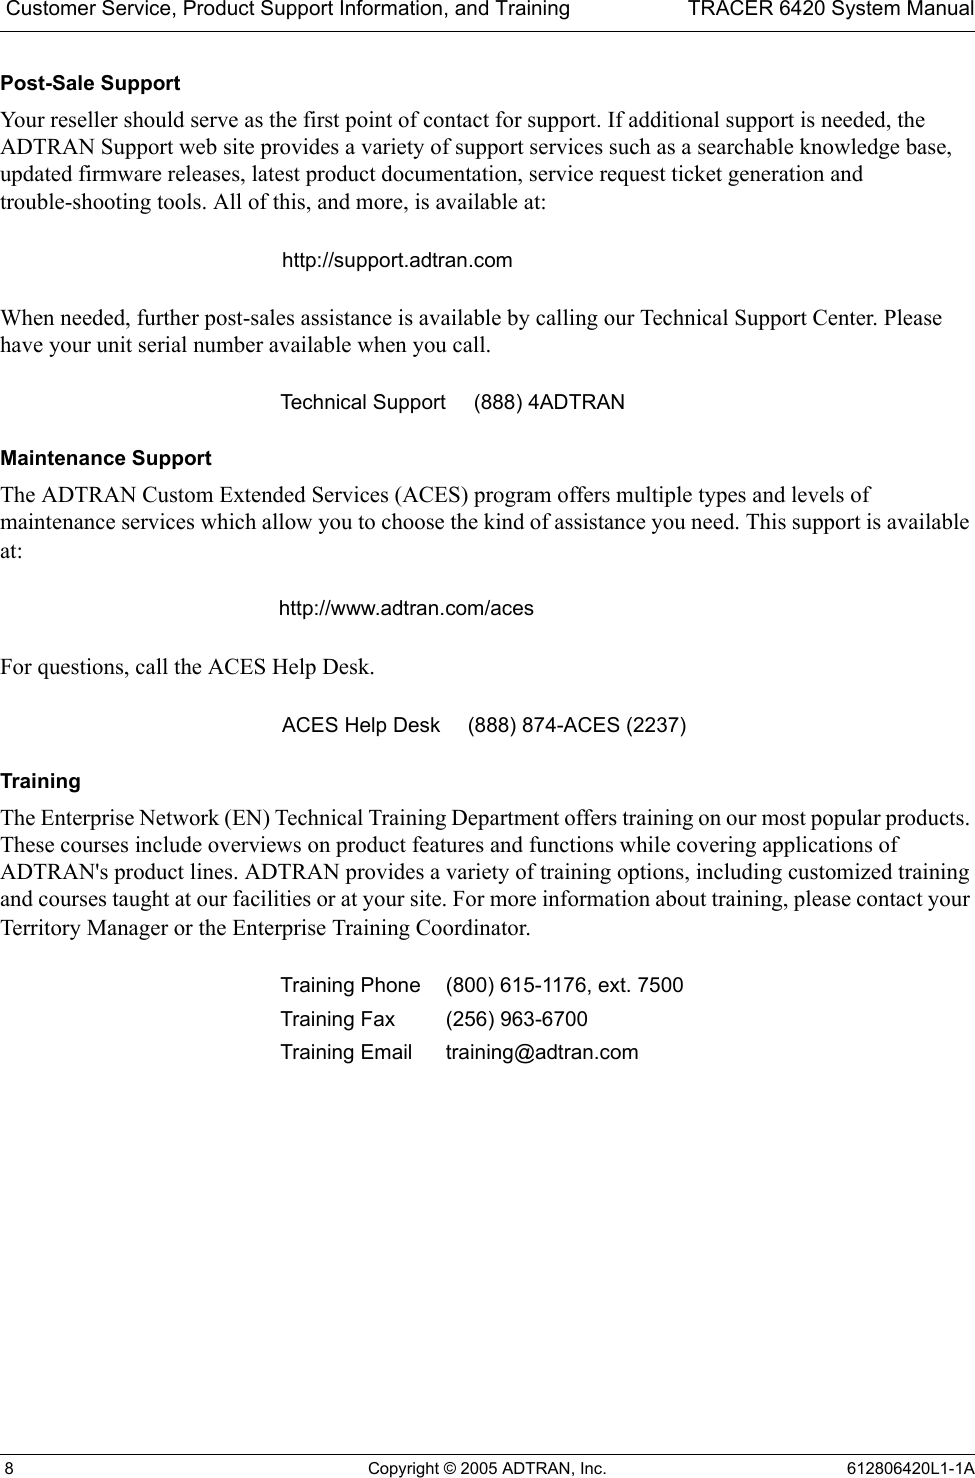  Customer Service, Product Support Information, and Training TRACER 6420 System Manual 8 Copyright © 2005 ADTRAN, Inc. 612806420L1-1APost-Sale SupportYour reseller should serve as the first point of contact for support. If additional support is needed, the ADTRAN Support web site provides a variety of support services such as a searchable knowledge base, updated firmware releases, latest product documentation, service request ticket generation and trouble-shooting tools. All of this, and more, is available at:When needed, further post-sales assistance is available by calling our Technical Support Center. Please have your unit serial number available when you call.Maintenance SupportThe ADTRAN Custom Extended Services (ACES) program offers multiple types and levels of maintenance services which allow you to choose the kind of assistance you need. This support is available at:For questions, call the ACES Help Desk. TrainingThe Enterprise Network (EN) Technical Training Department offers training on our most popular products. These courses include overviews on product features and functions while covering applications of ADTRAN&apos;s product lines. ADTRAN provides a variety of training options, including customized training and courses taught at our facilities or at your site. For more information about training, please contact your Territory Manager or the Enterprise Training Coordinator.http://support.adtran.comTechnical Support (888) 4ADTRANhttp://www.adtran.com/acesACES Help Desk (888) 874-ACES (2237) Training Phone (800) 615-1176, ext. 7500 Training Fax (256) 963-6700Training Email training@adtran.com